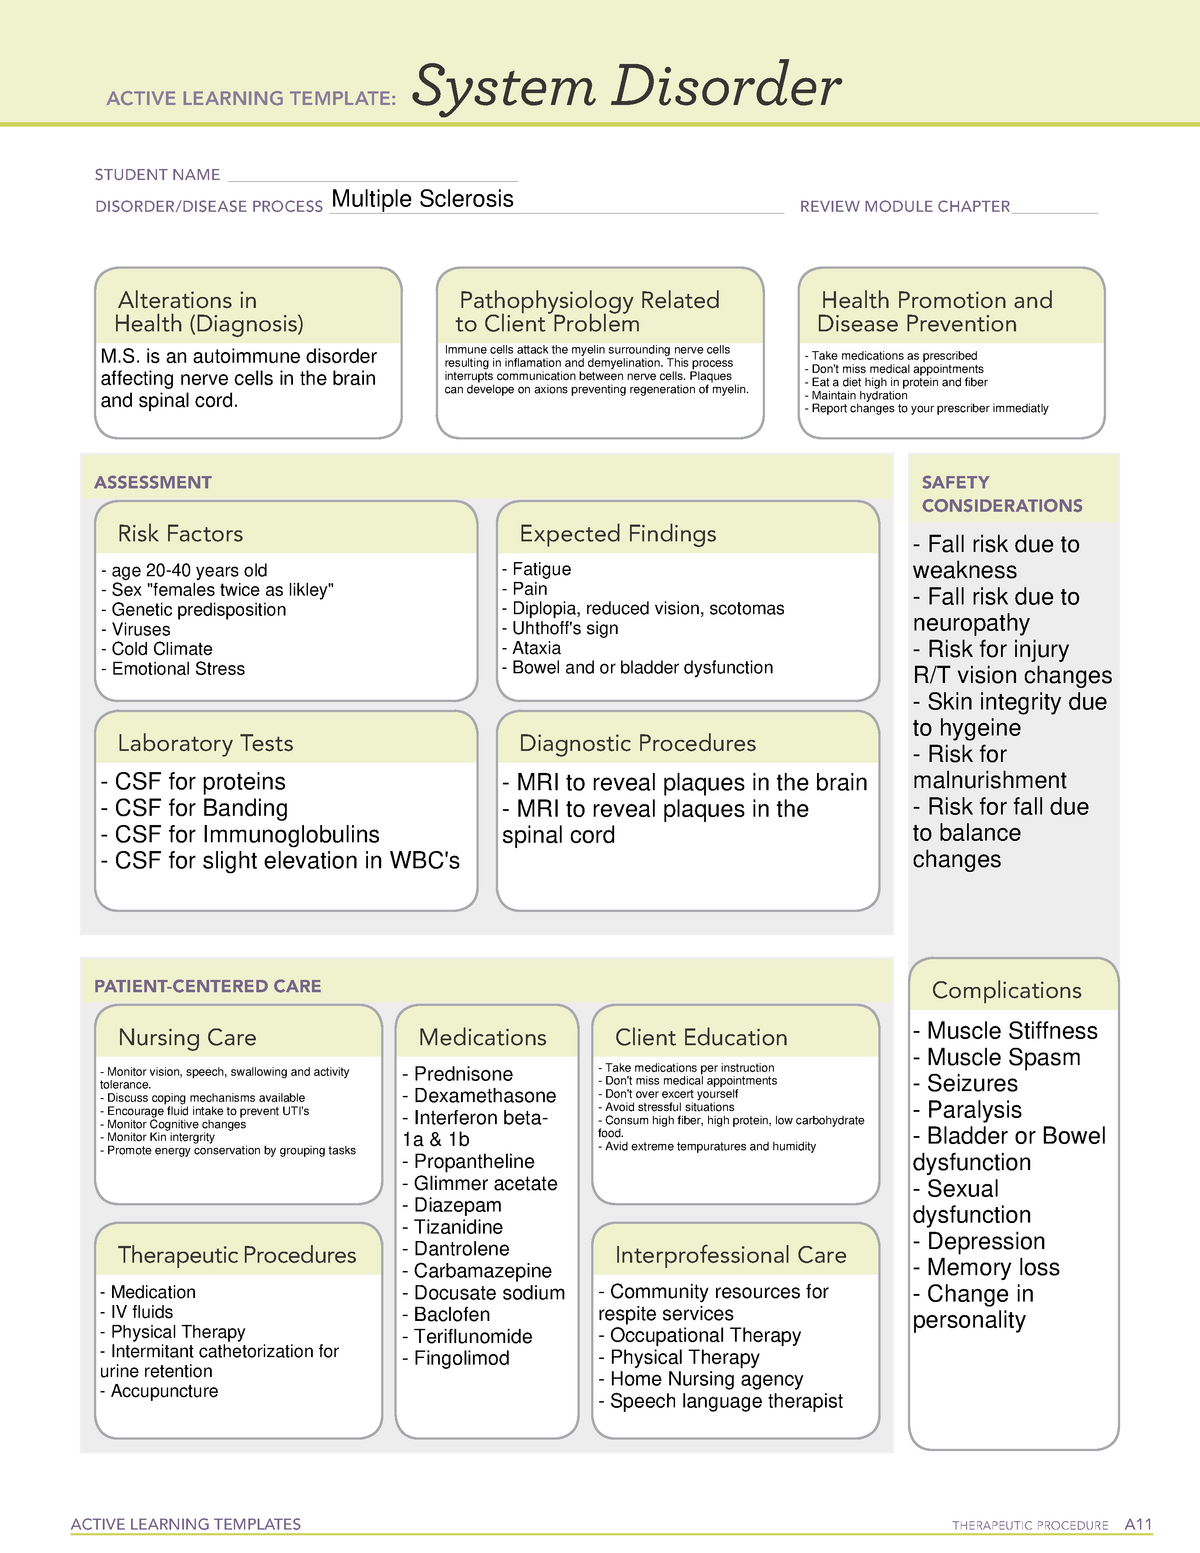 system-disorder-active-learning-template